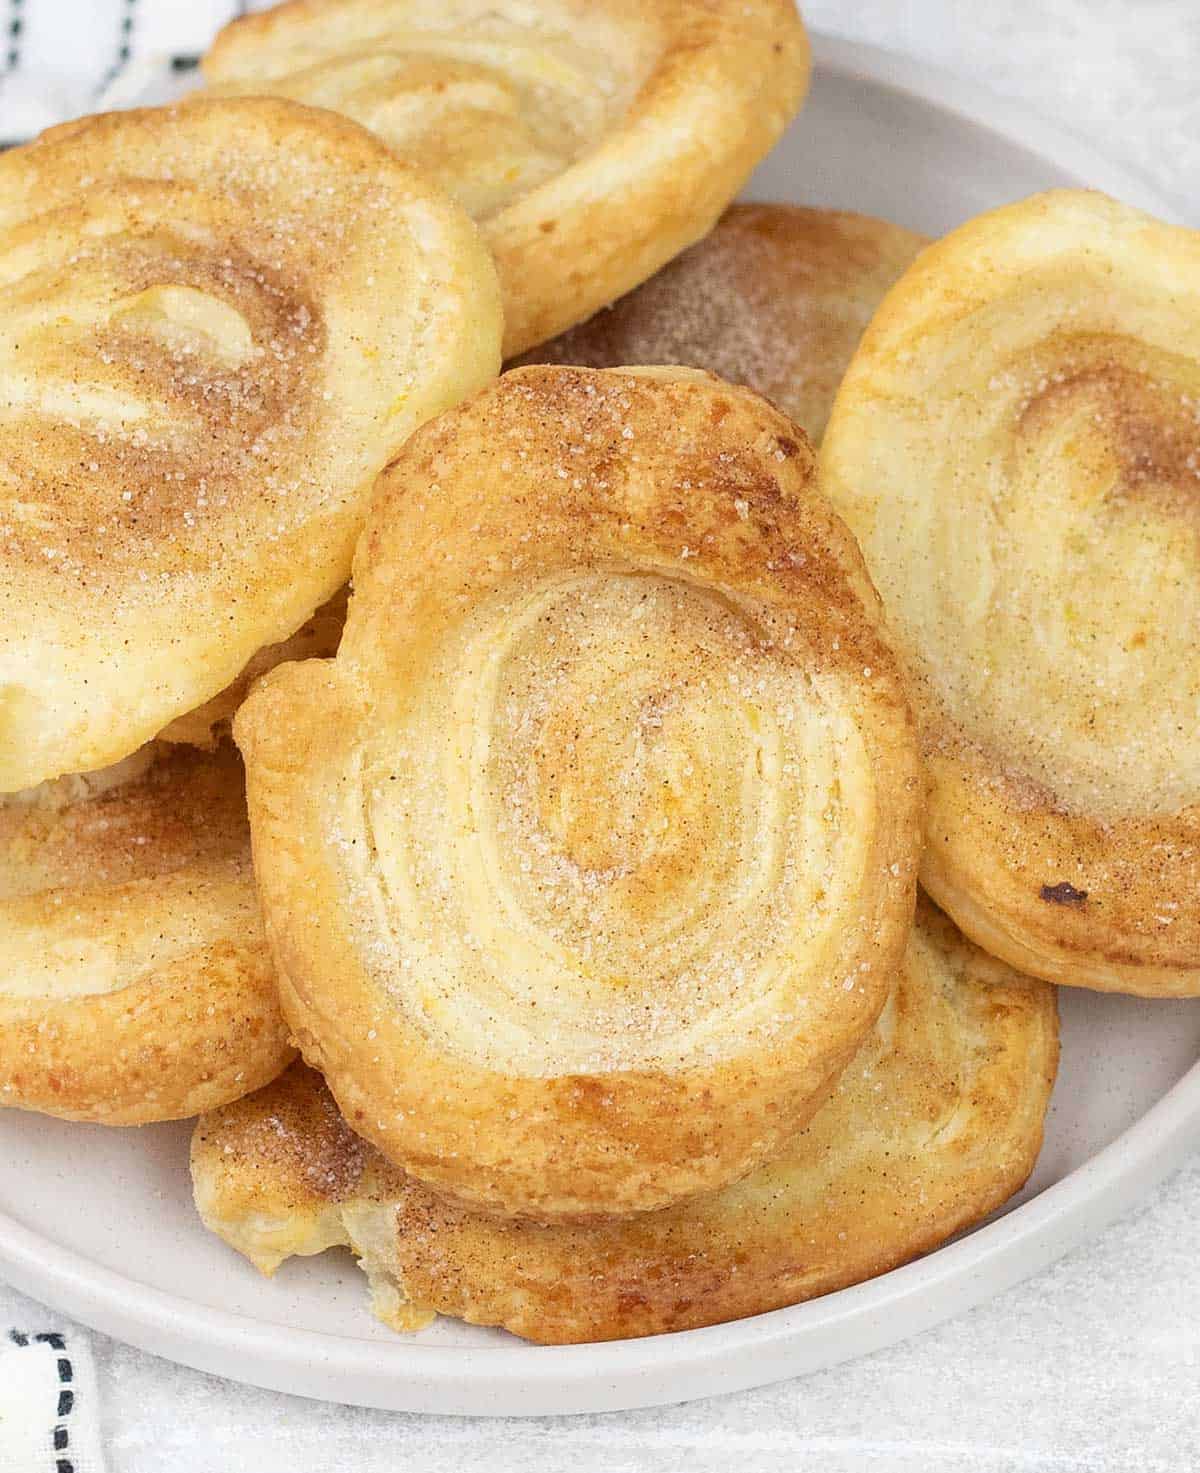 Arlettes biscuits topped with cinnamon sugar